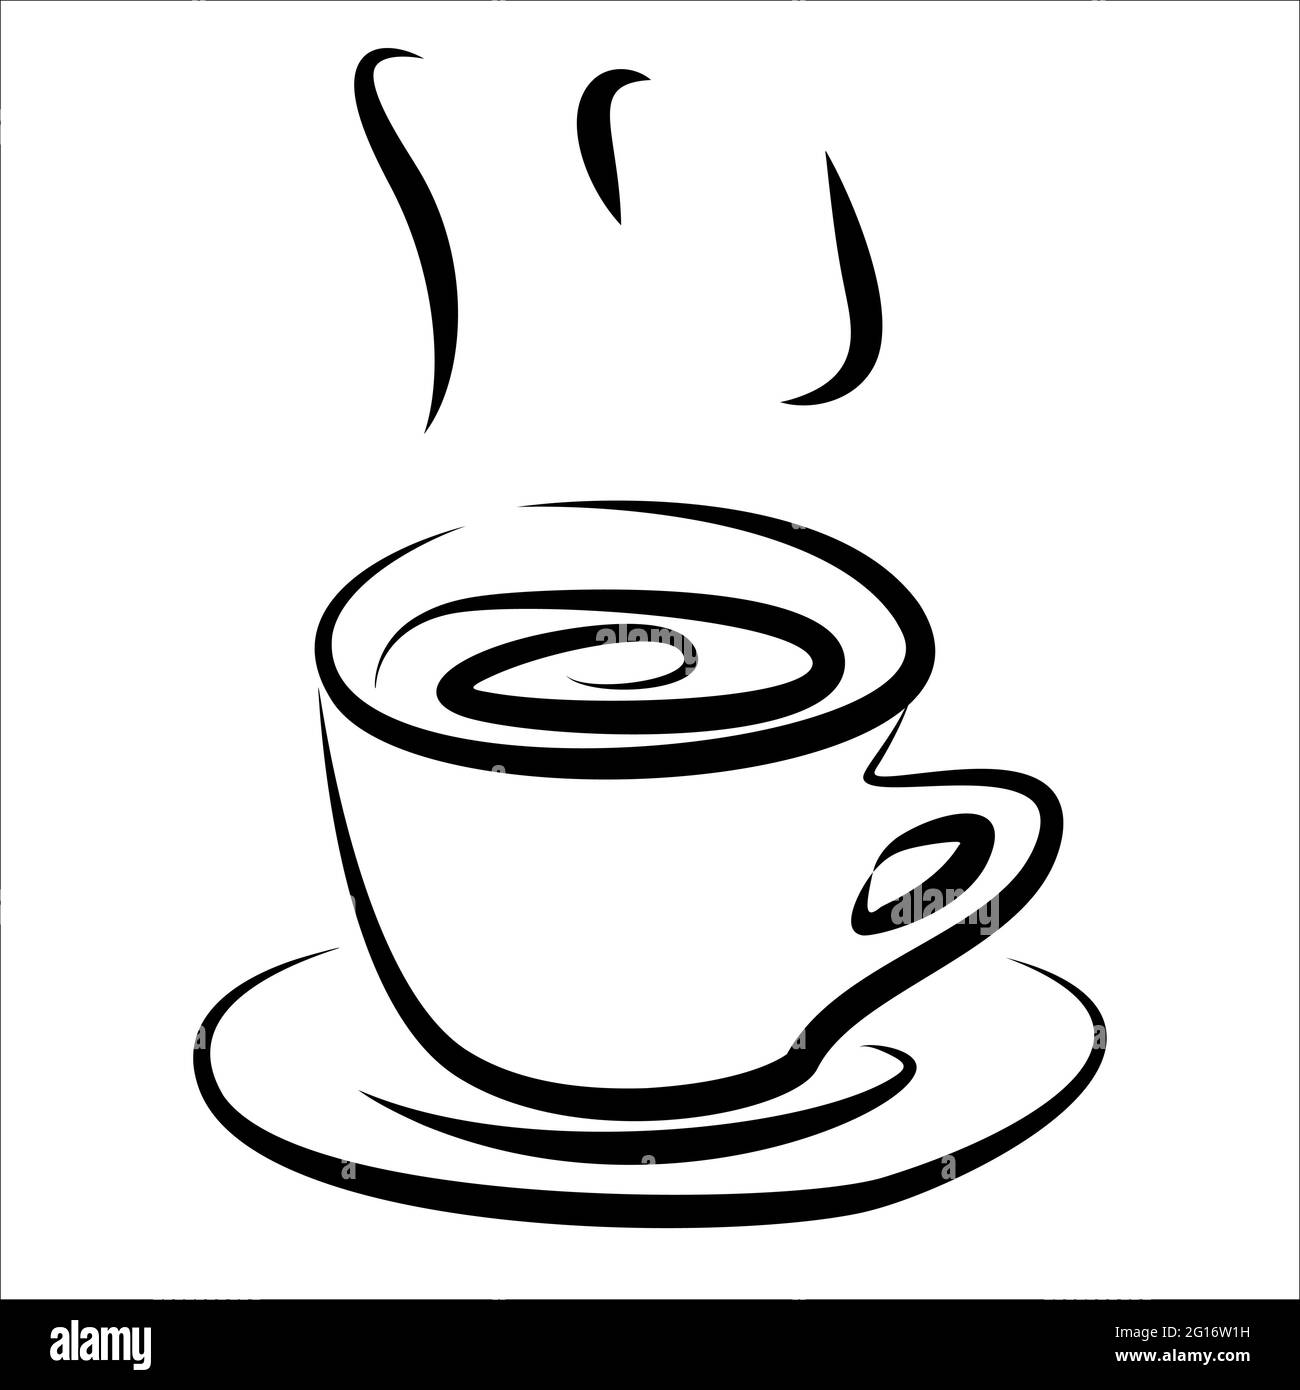 Learn how to draw a cup of coffee drawing - EASY TO DRAW EVERYTHING